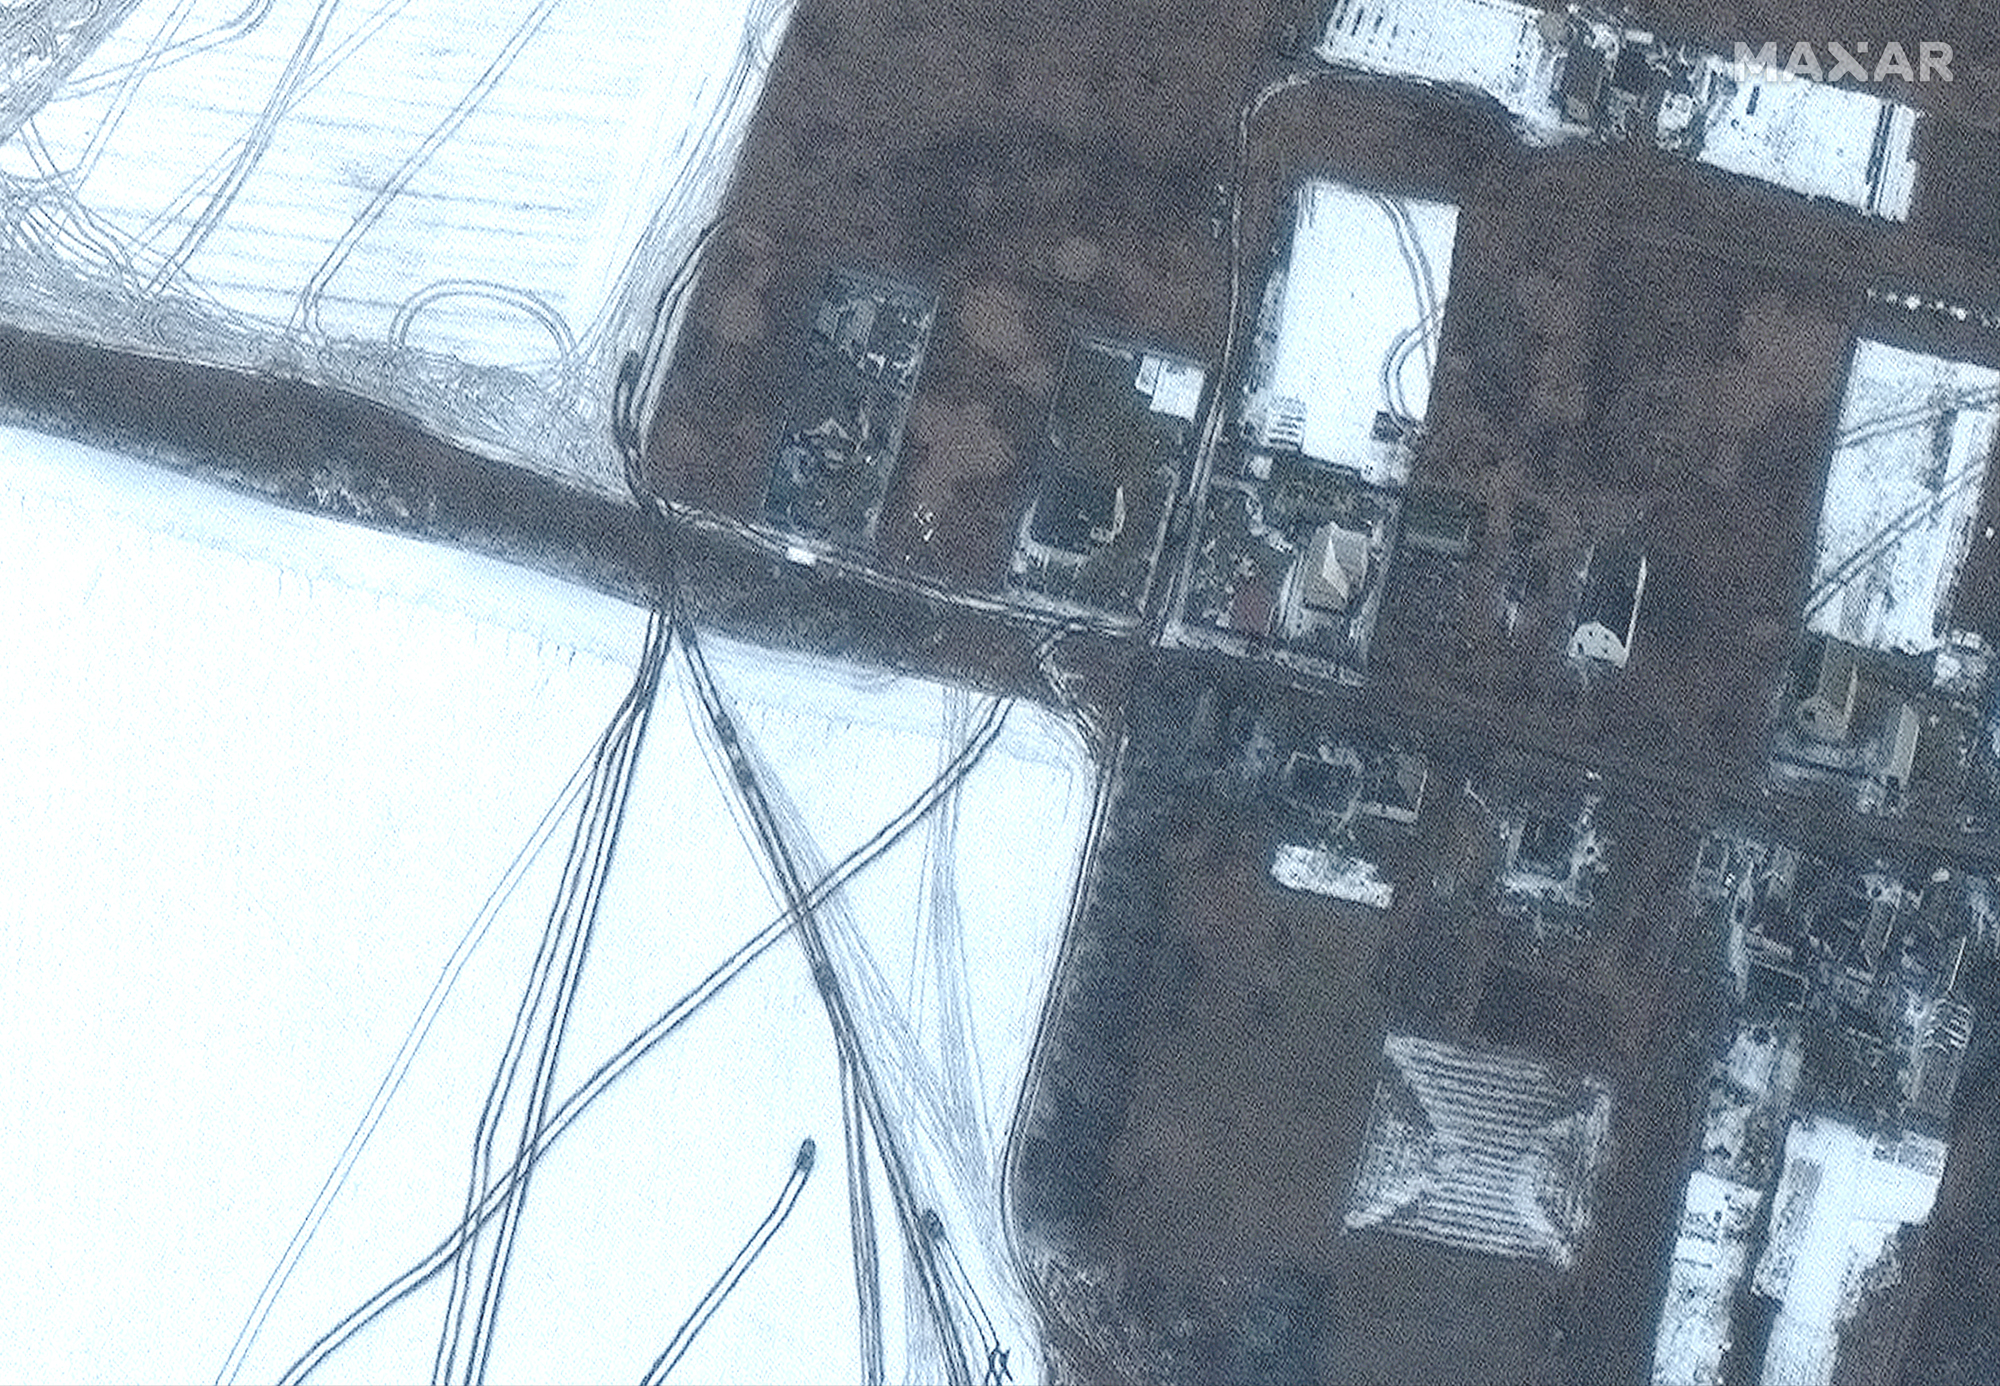 This close up offers a zoomed-ni view of the armored vehicles moving in Hostomel, Ukraine northeast of Antonov Airport on March 8, 2022.